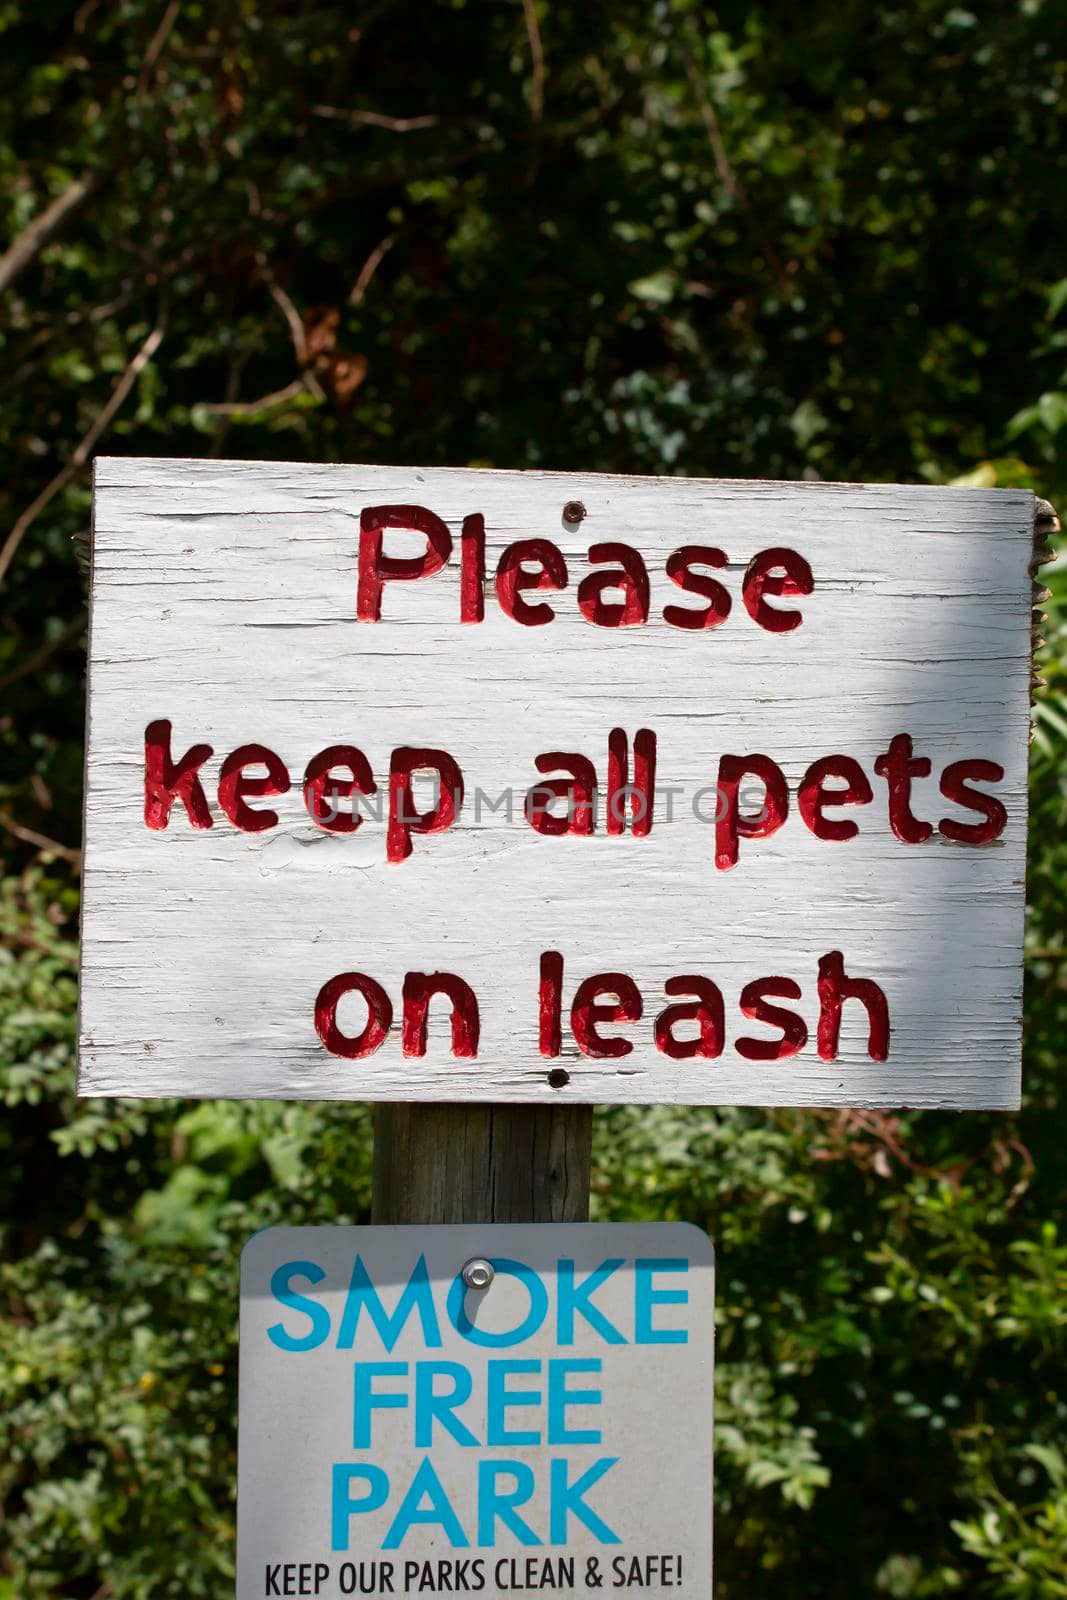 White sign telling patrons to "Please keep all pets on leash" and that the park is a"Smoke Free Park"